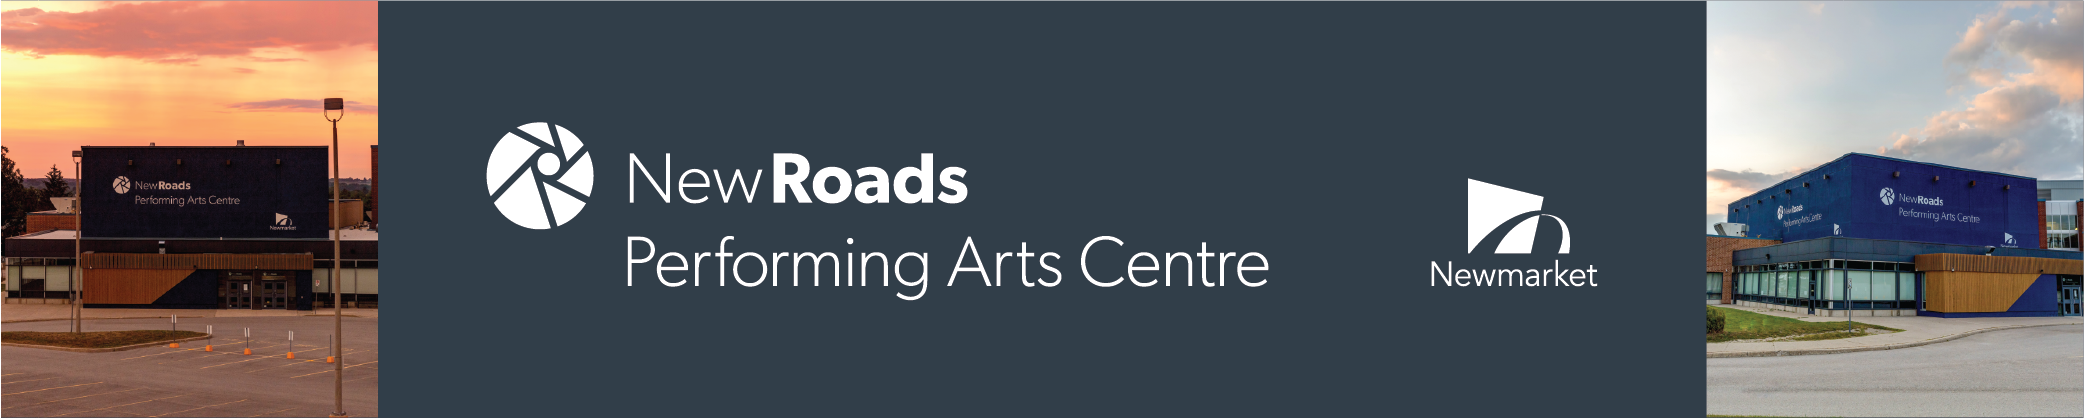 new roads performing arts centre banner